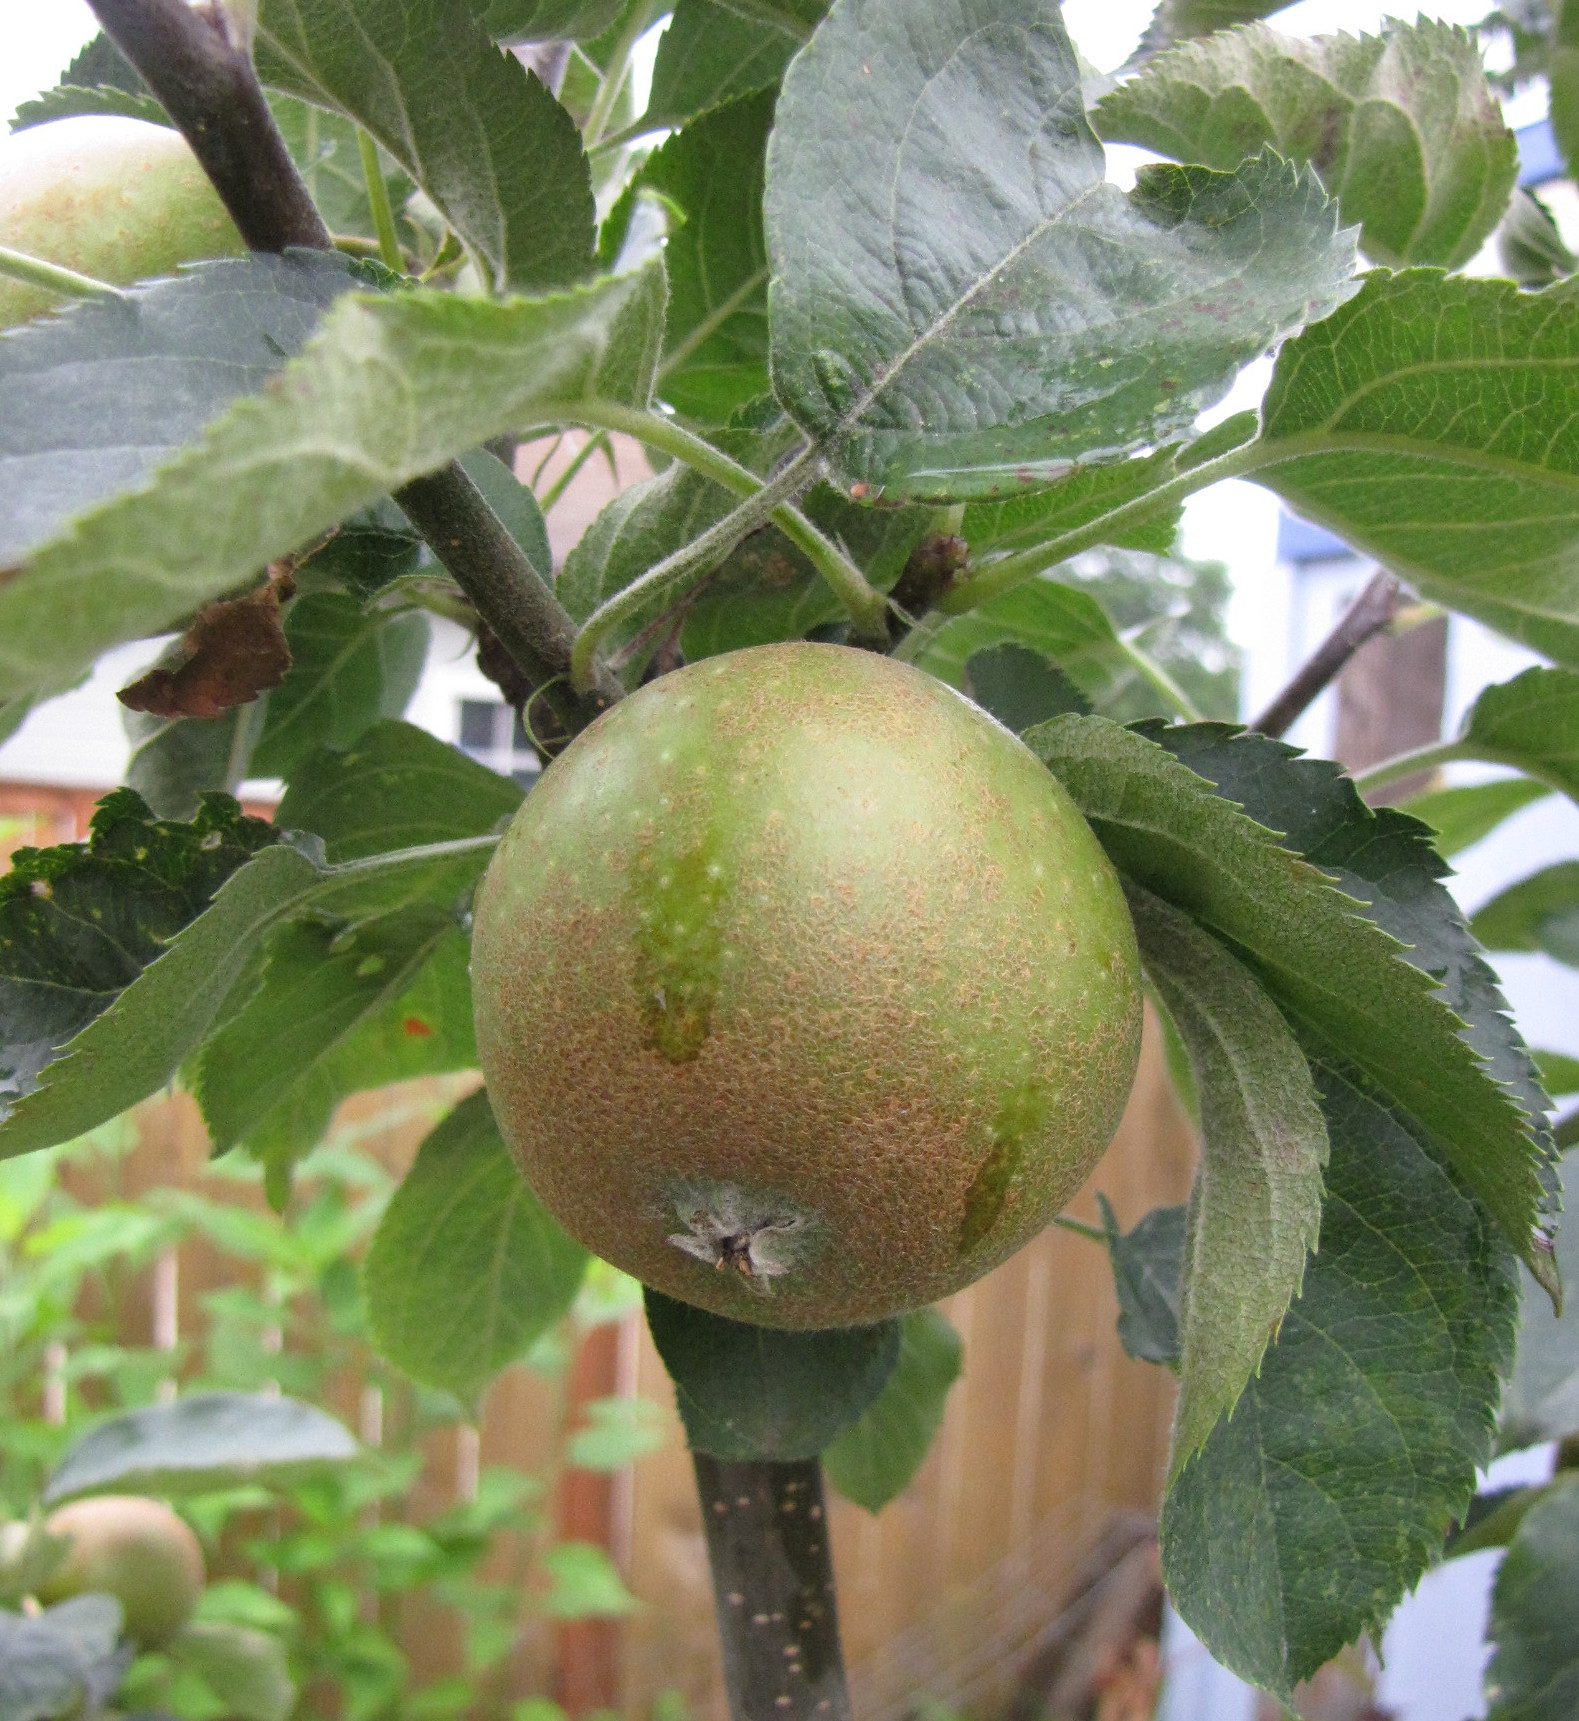 A young Cox's Orange Pippin apple